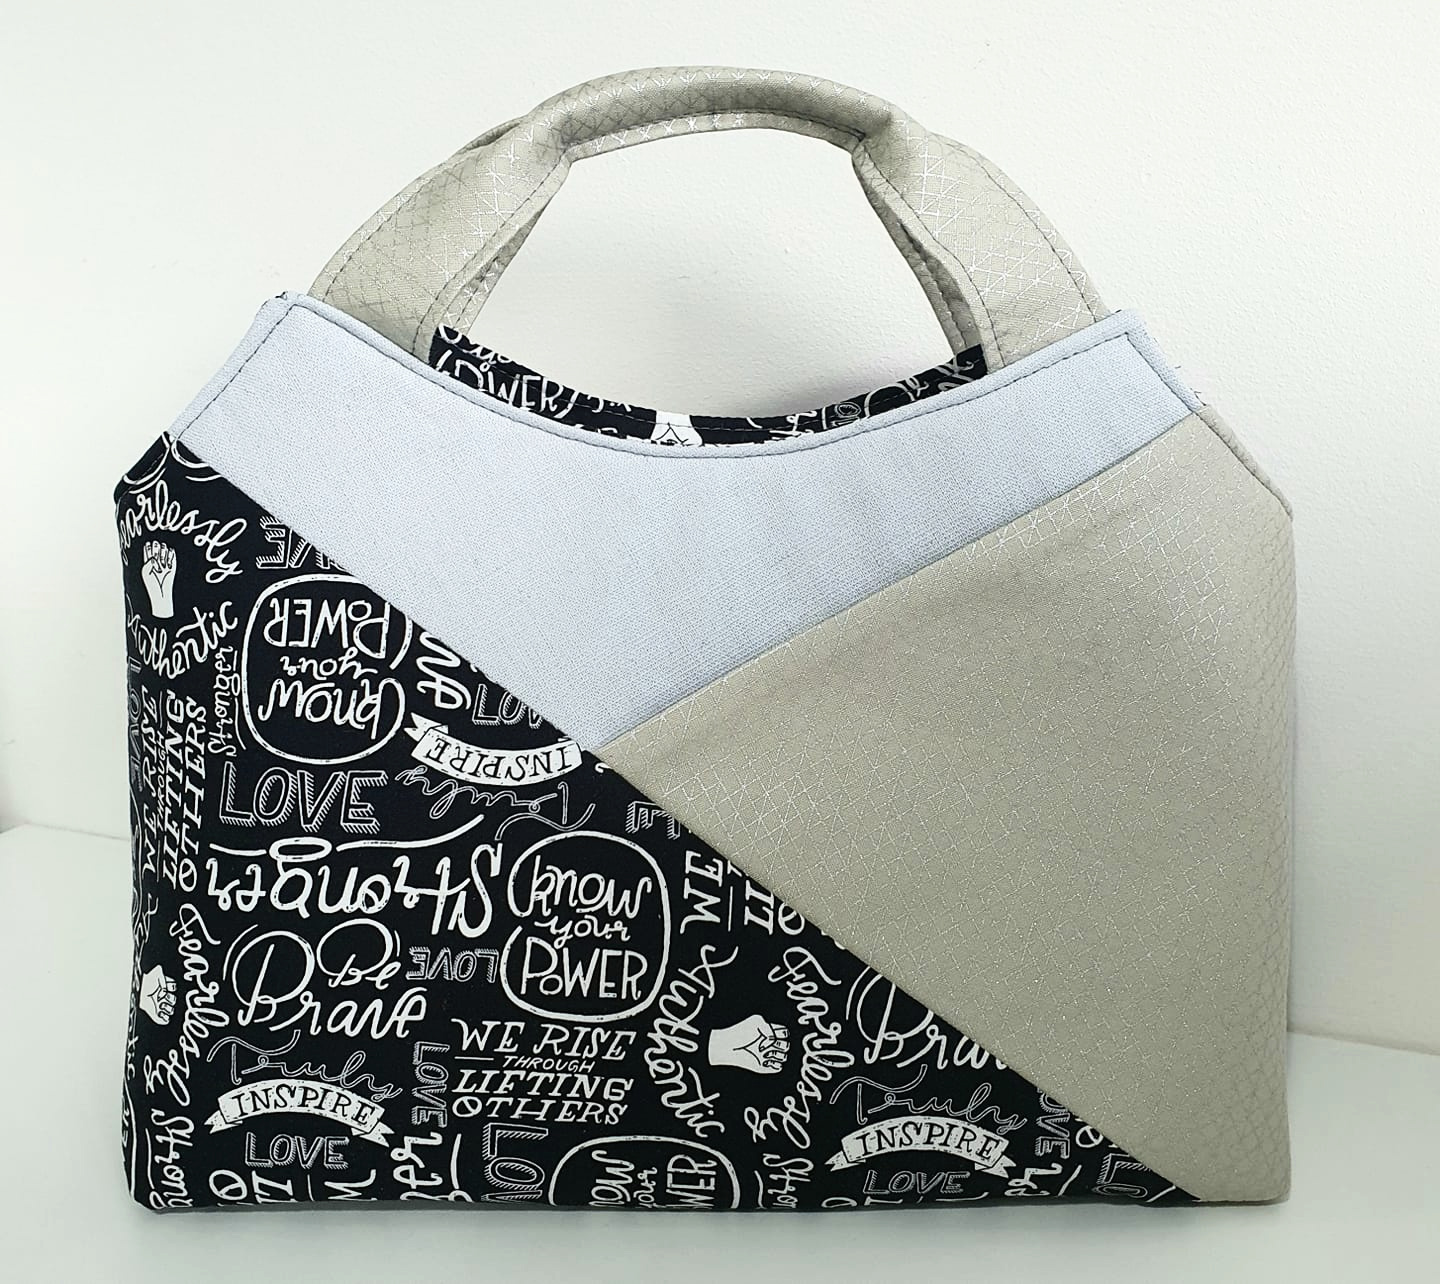 The Hope Handbag, designed by Sewing Patterns by Junyuan 
 for The Bag of the Month Club